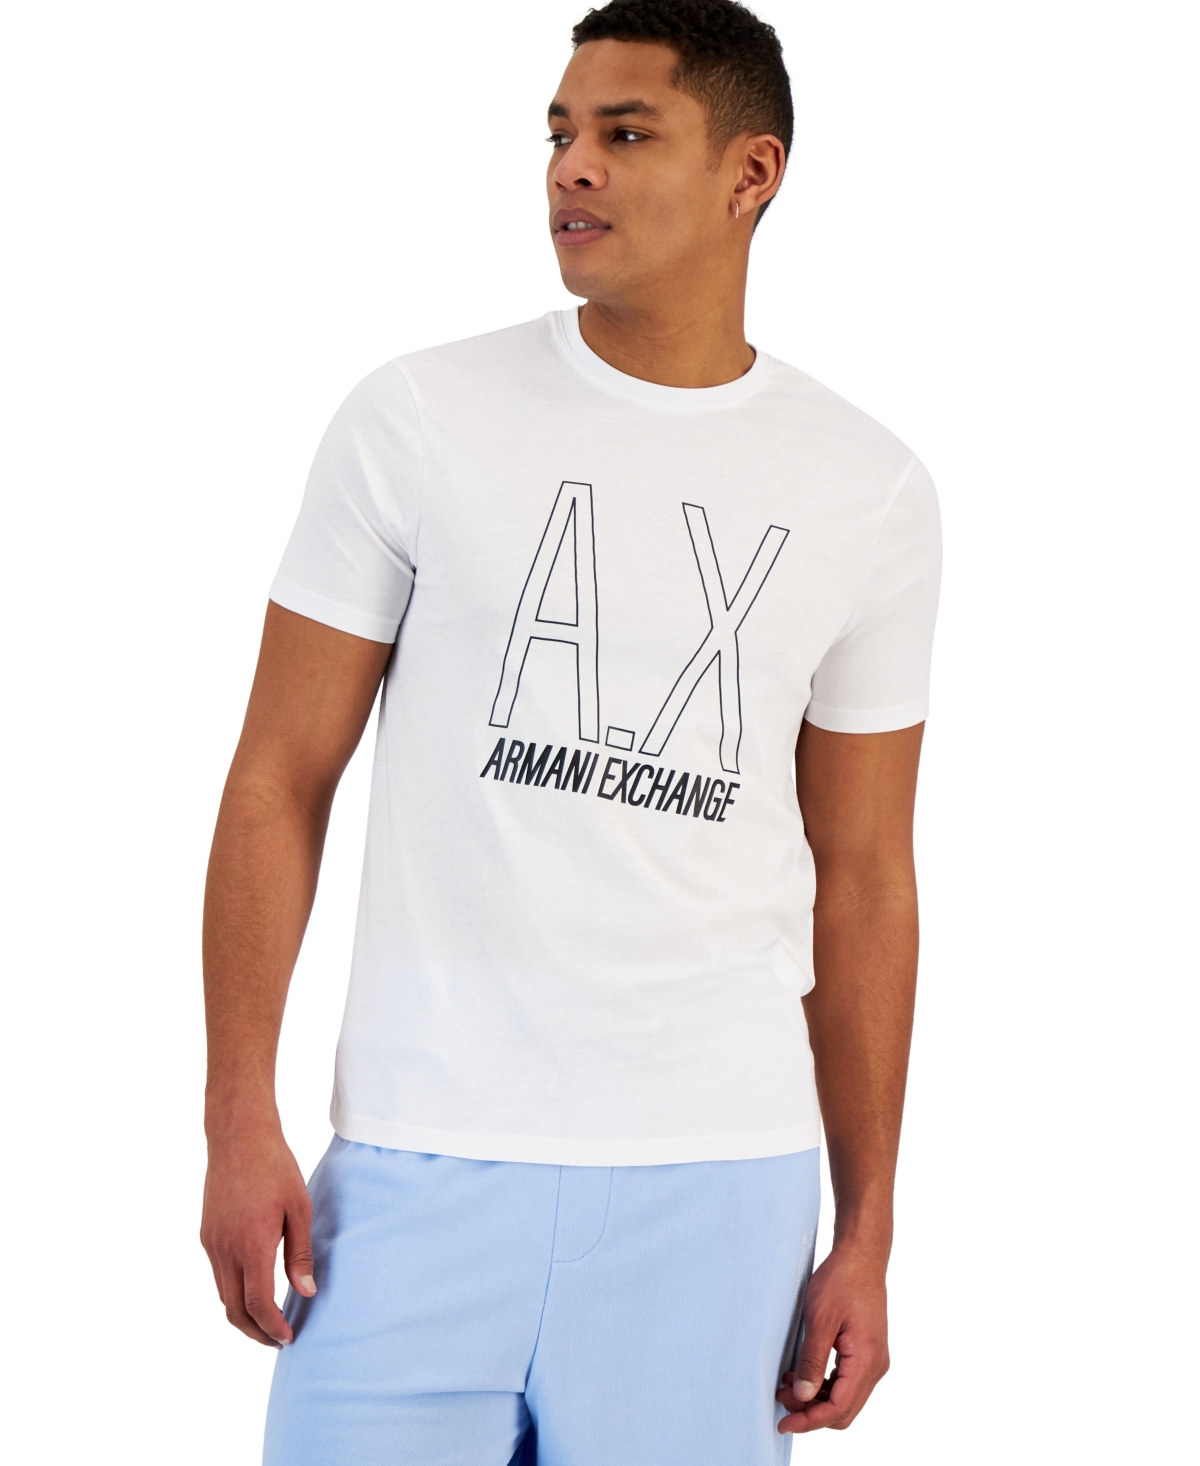 A X ARMANI EXCHANGE A X ARMANI EXCHANGE MEN'S AX CENTER LOGO T-SHIRT, CREATED EXCLUSIVELY FOR MACY'S